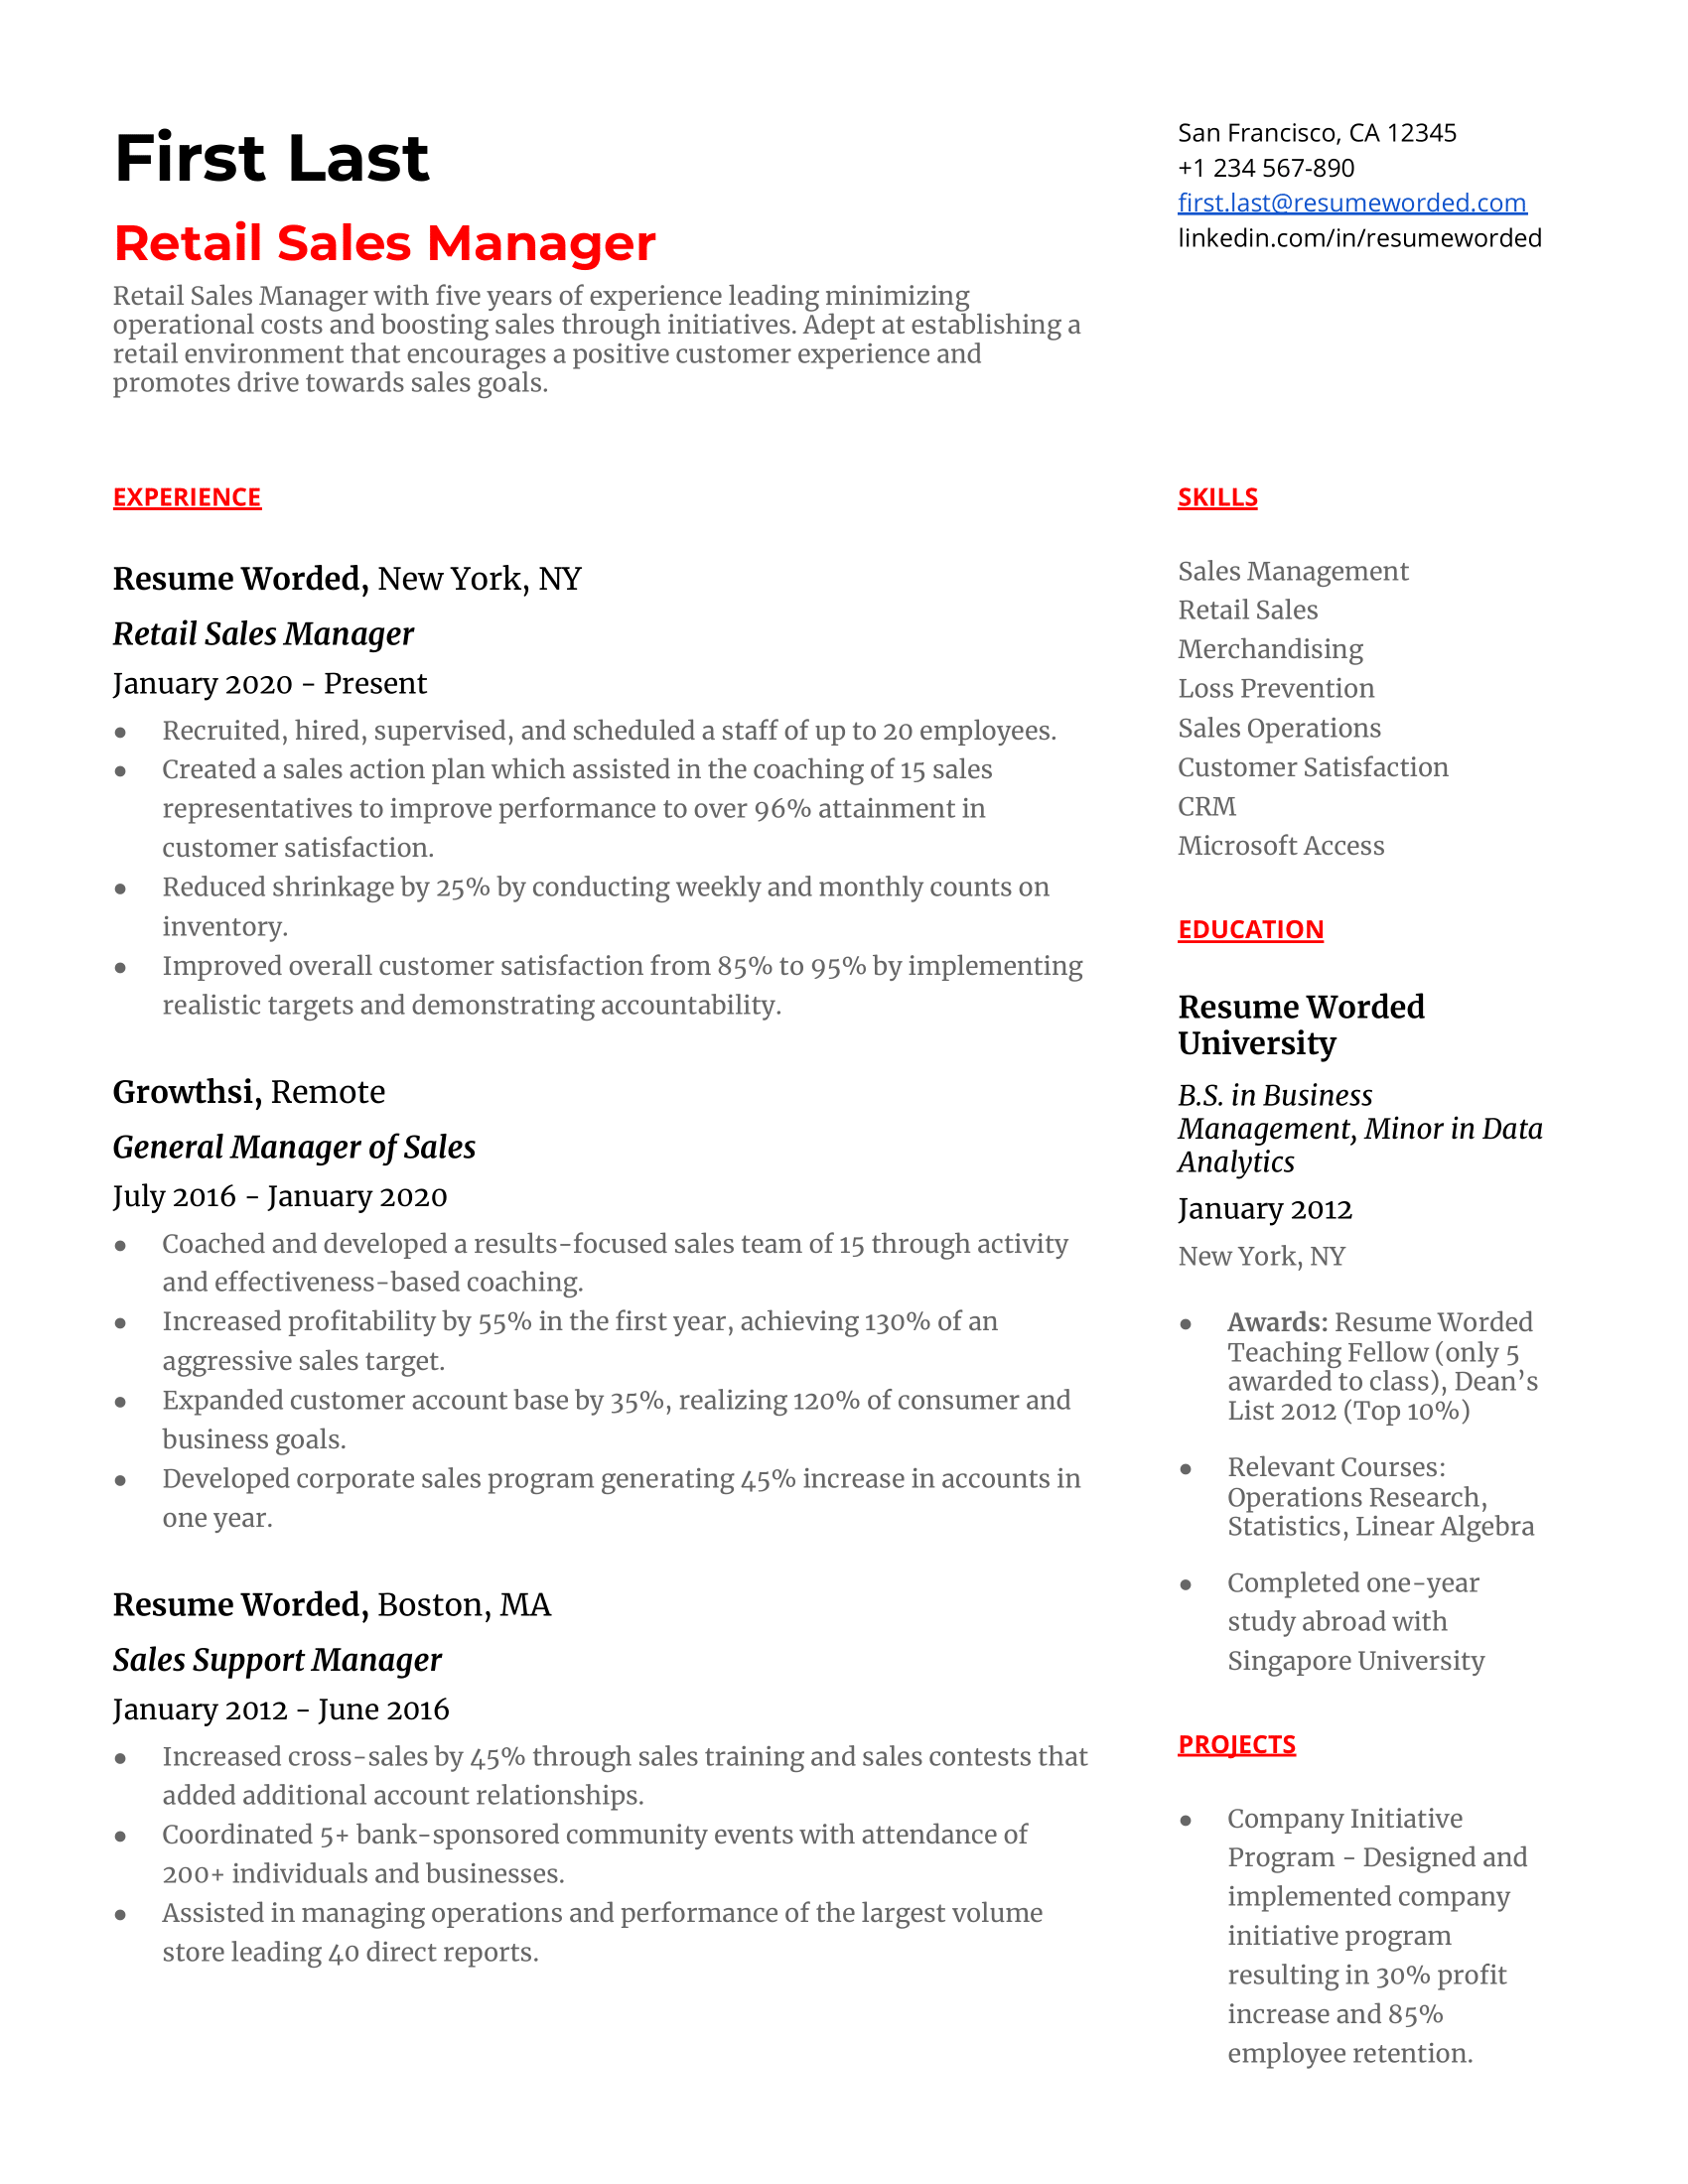 Detail-filled CV of a Retail Sales Manager showcasing leadership and merchandising skills.